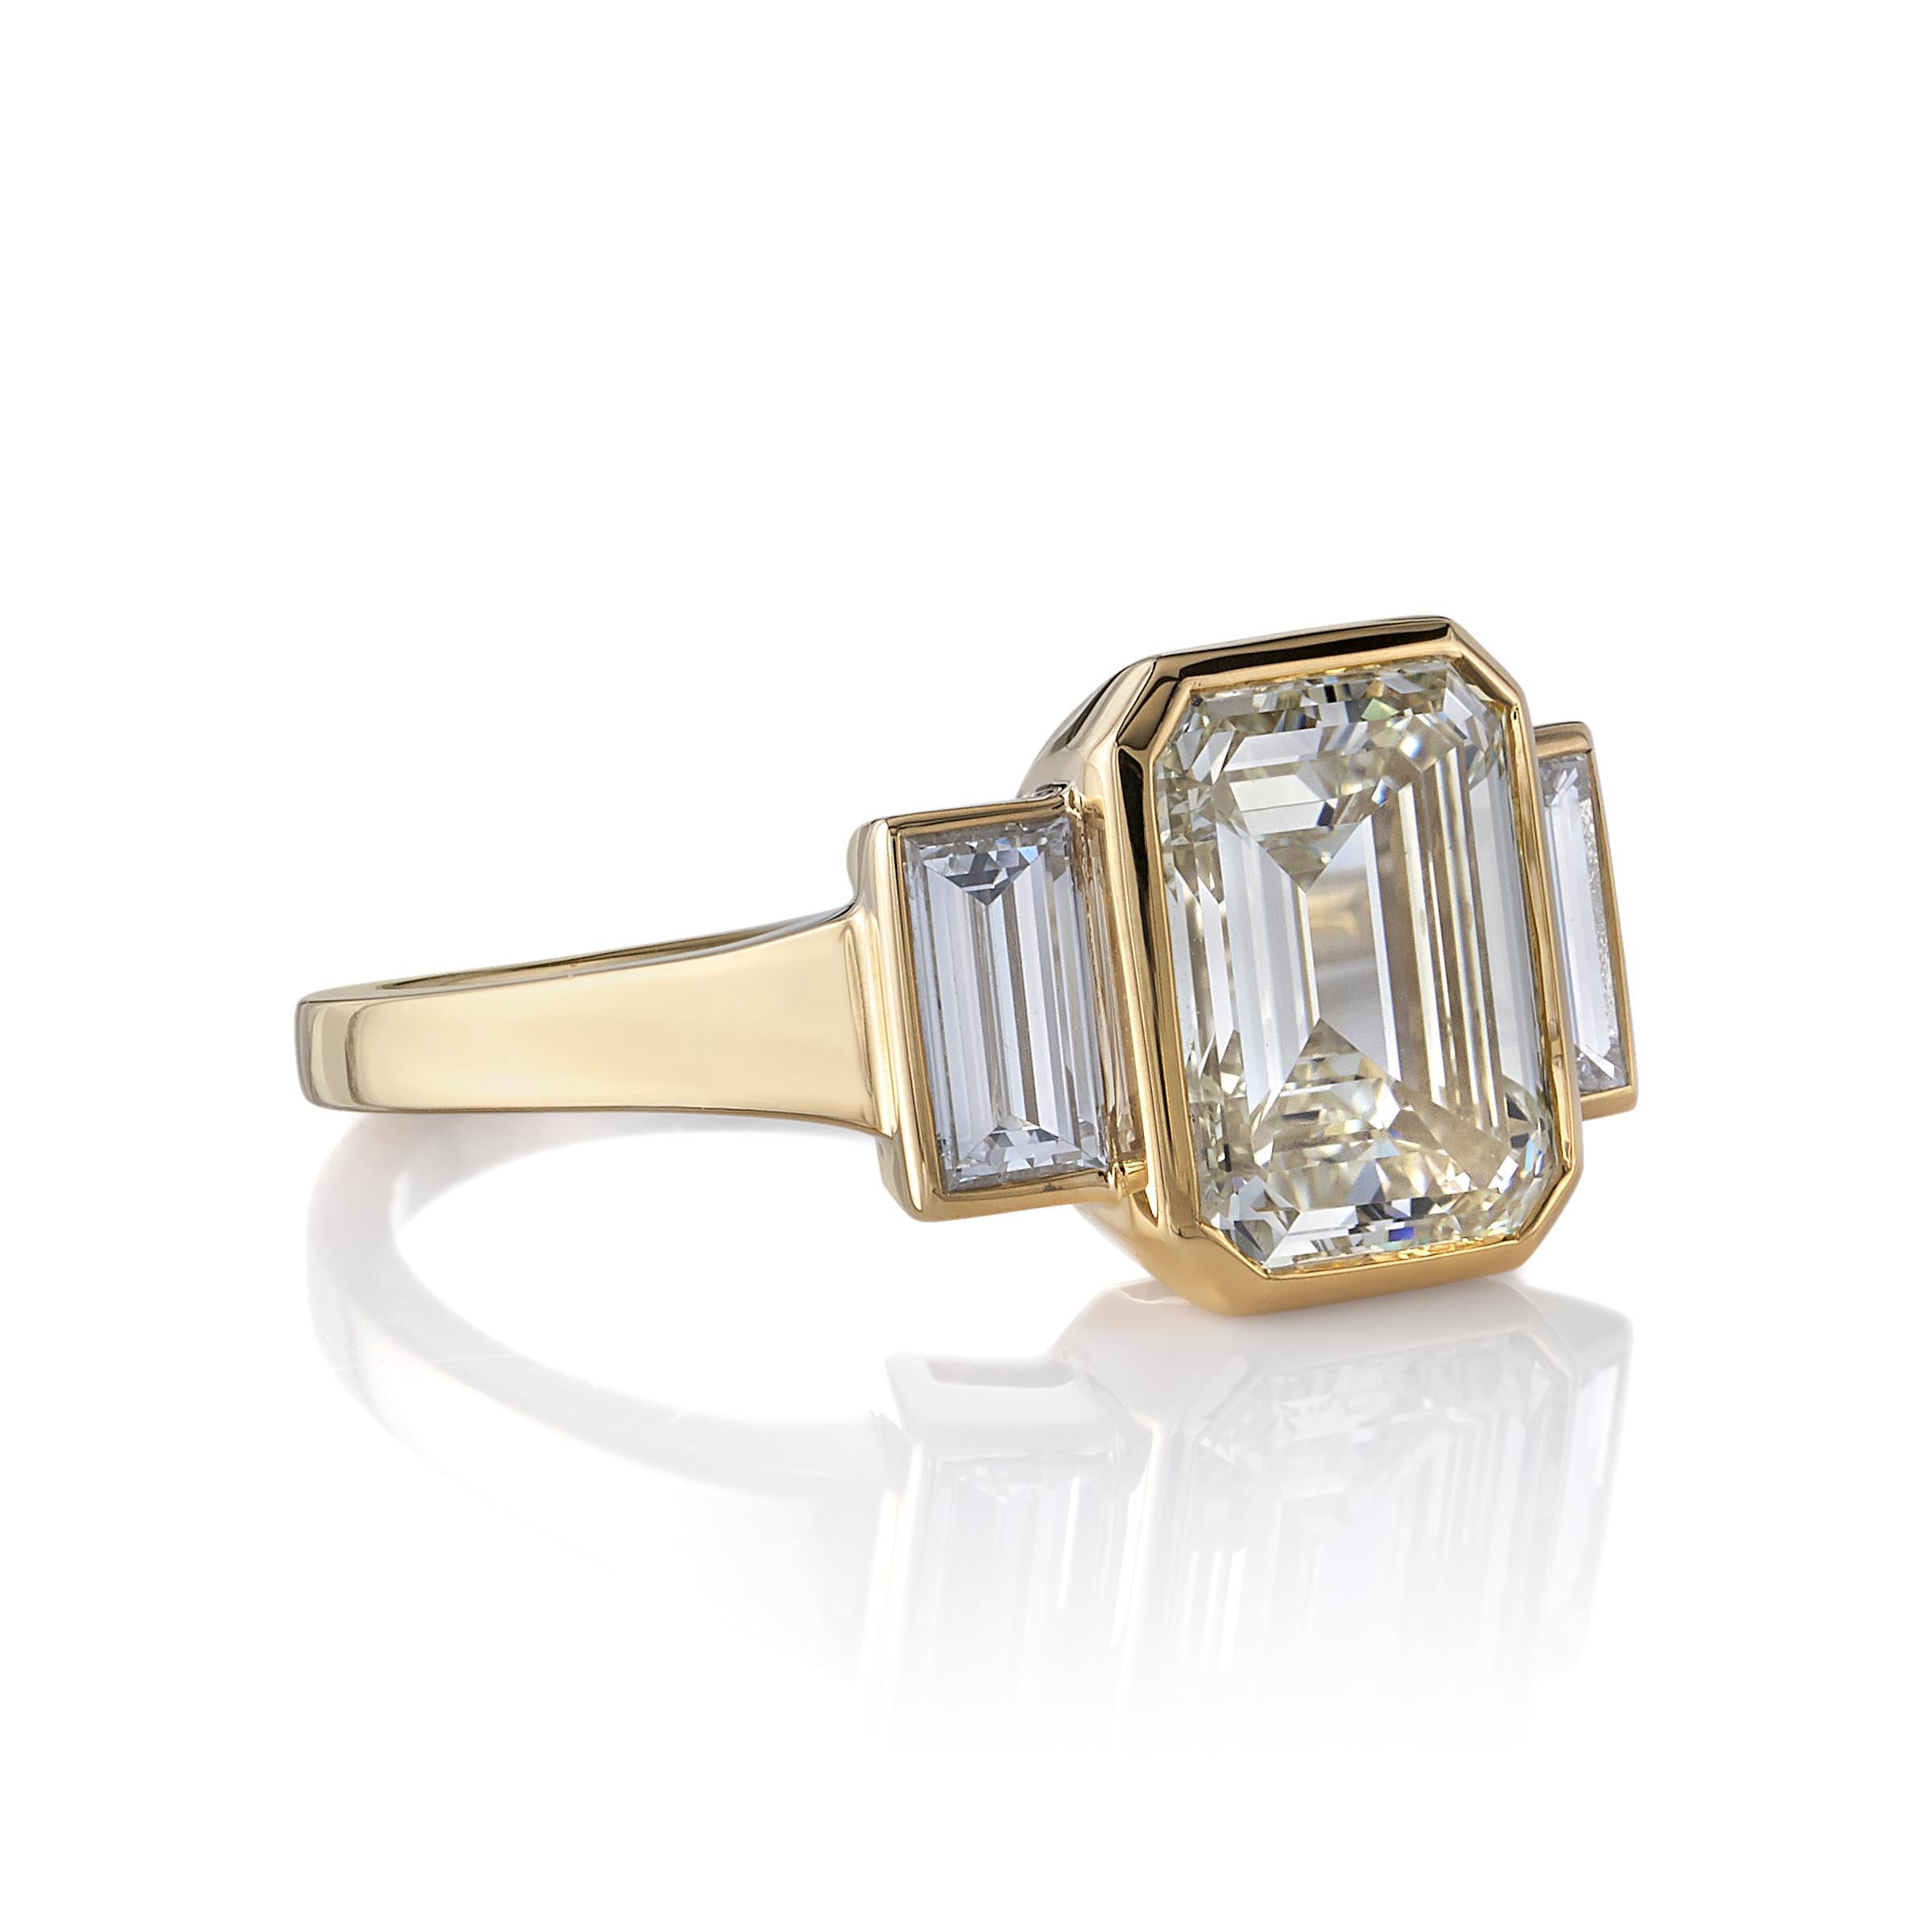 3.01ct U-V/VVS2 GIA certified Emerald cut diamond with 0.66ctw Baguette cut accent diamonds set in a handcrafted 18K yellow gold mounting.

Ring is currently a size 6 and can be sized to fit.

Our jewelry is made locally in Los Angeles and most